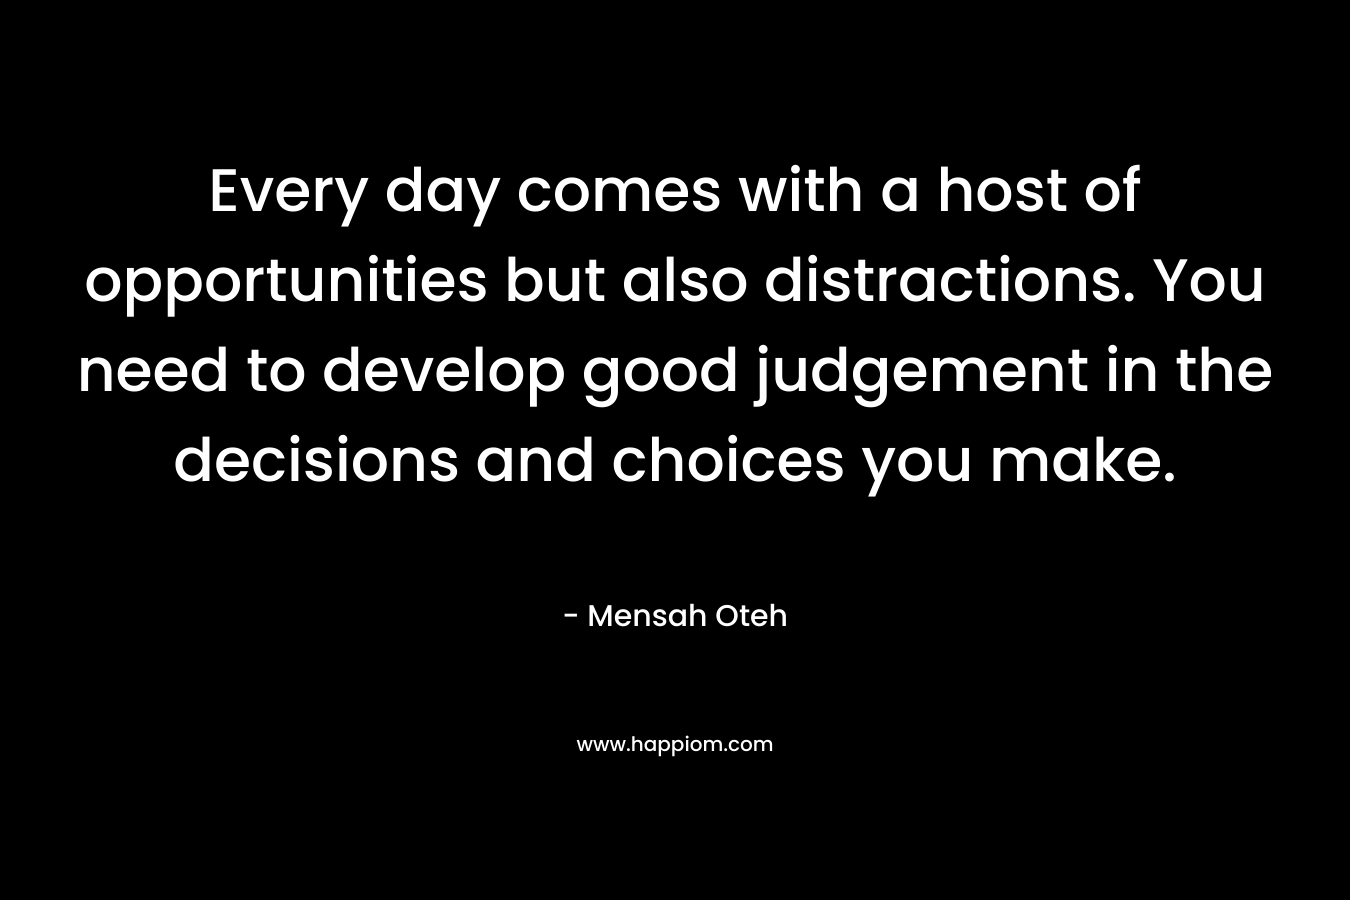 Every day comes with a host of opportunities but also distractions. You need to develop good judgement in the decisions and choices you make.